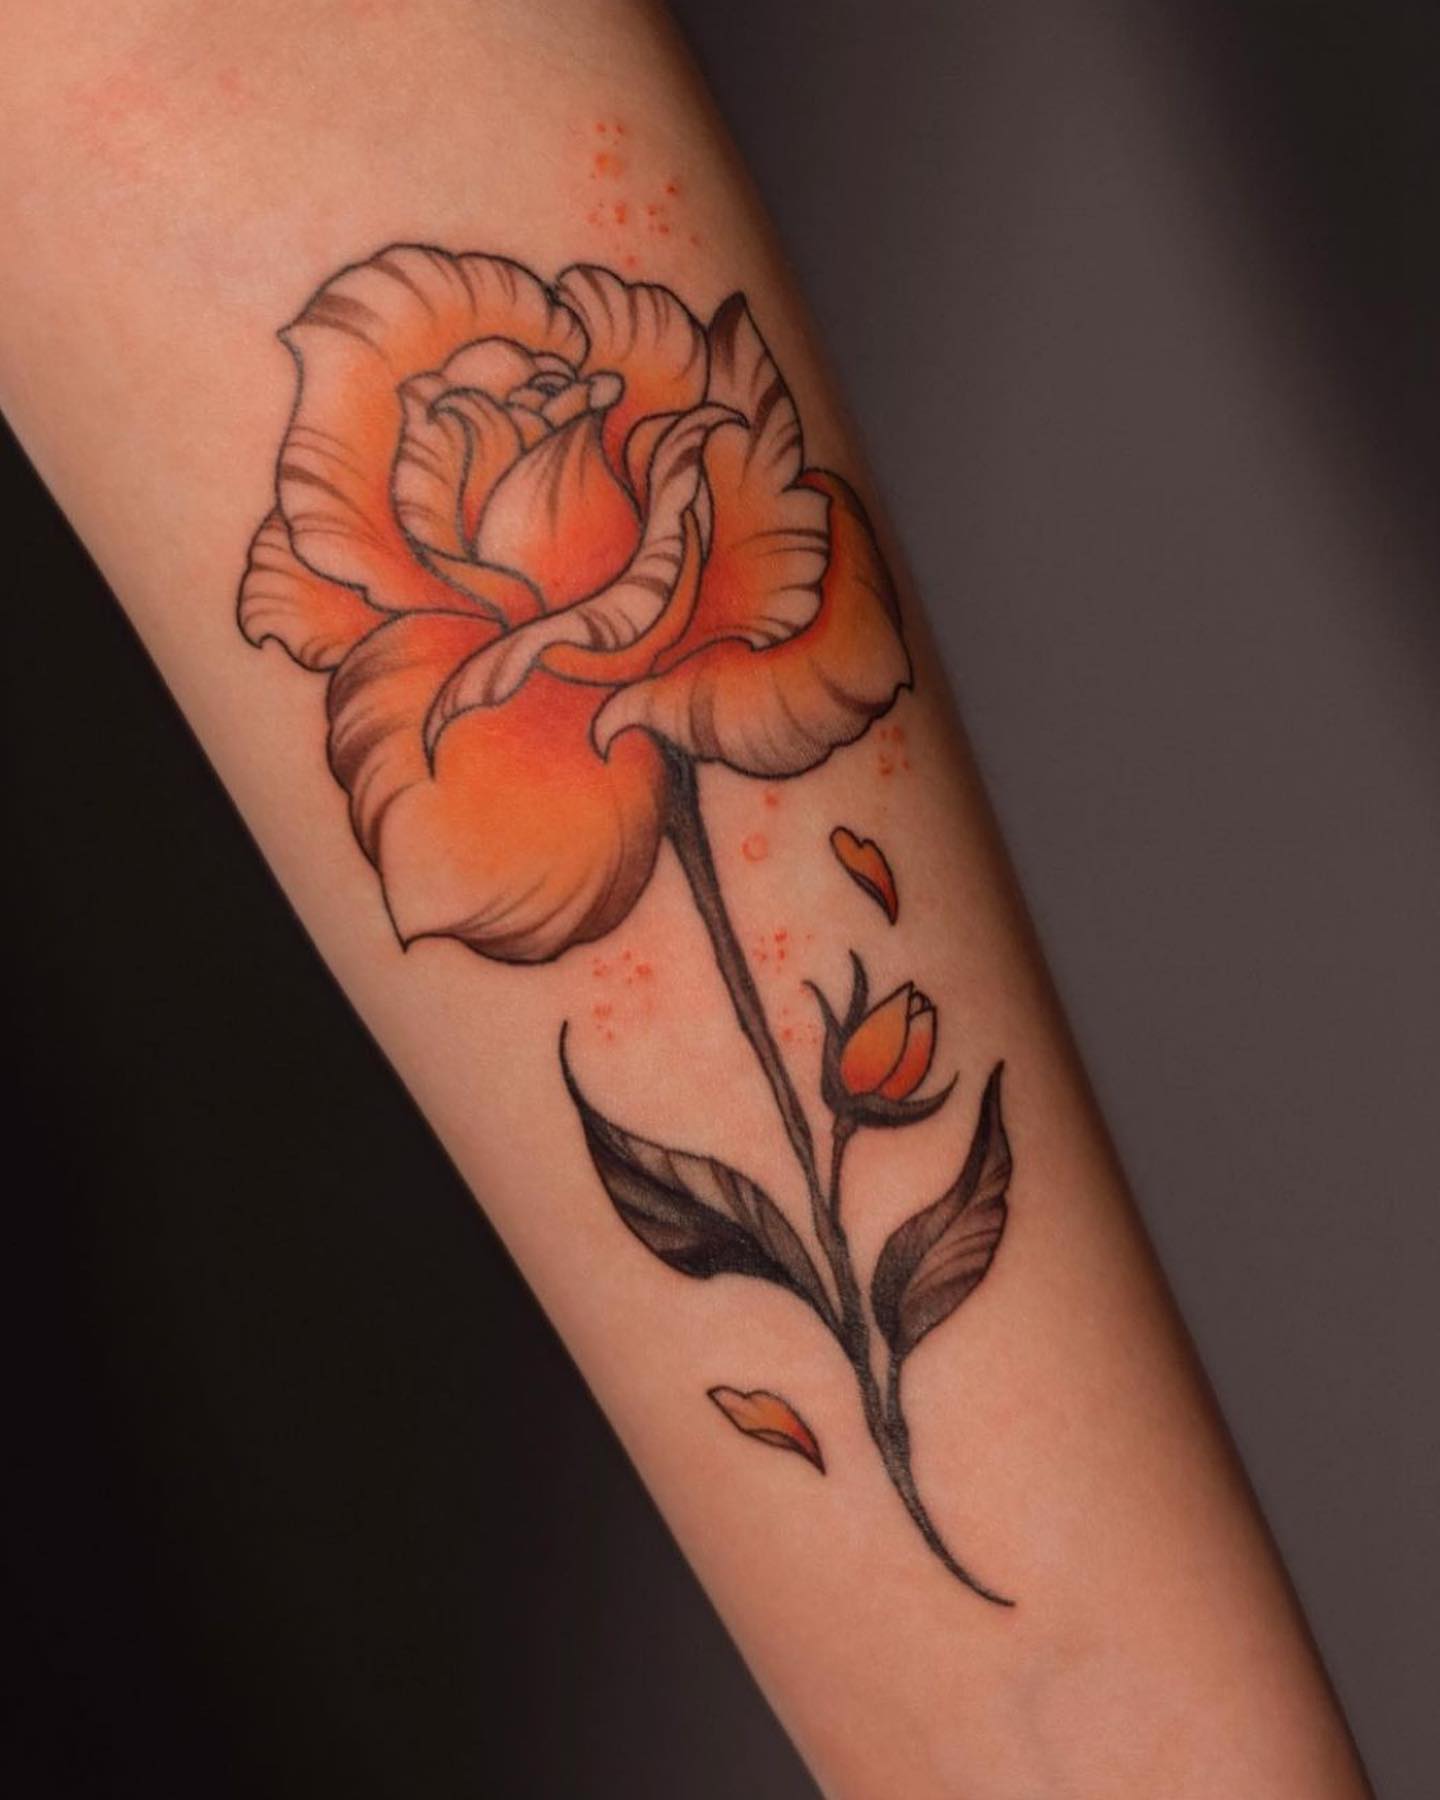 Shoulder Realistic Flower Tattoo by Inkd Chronicles